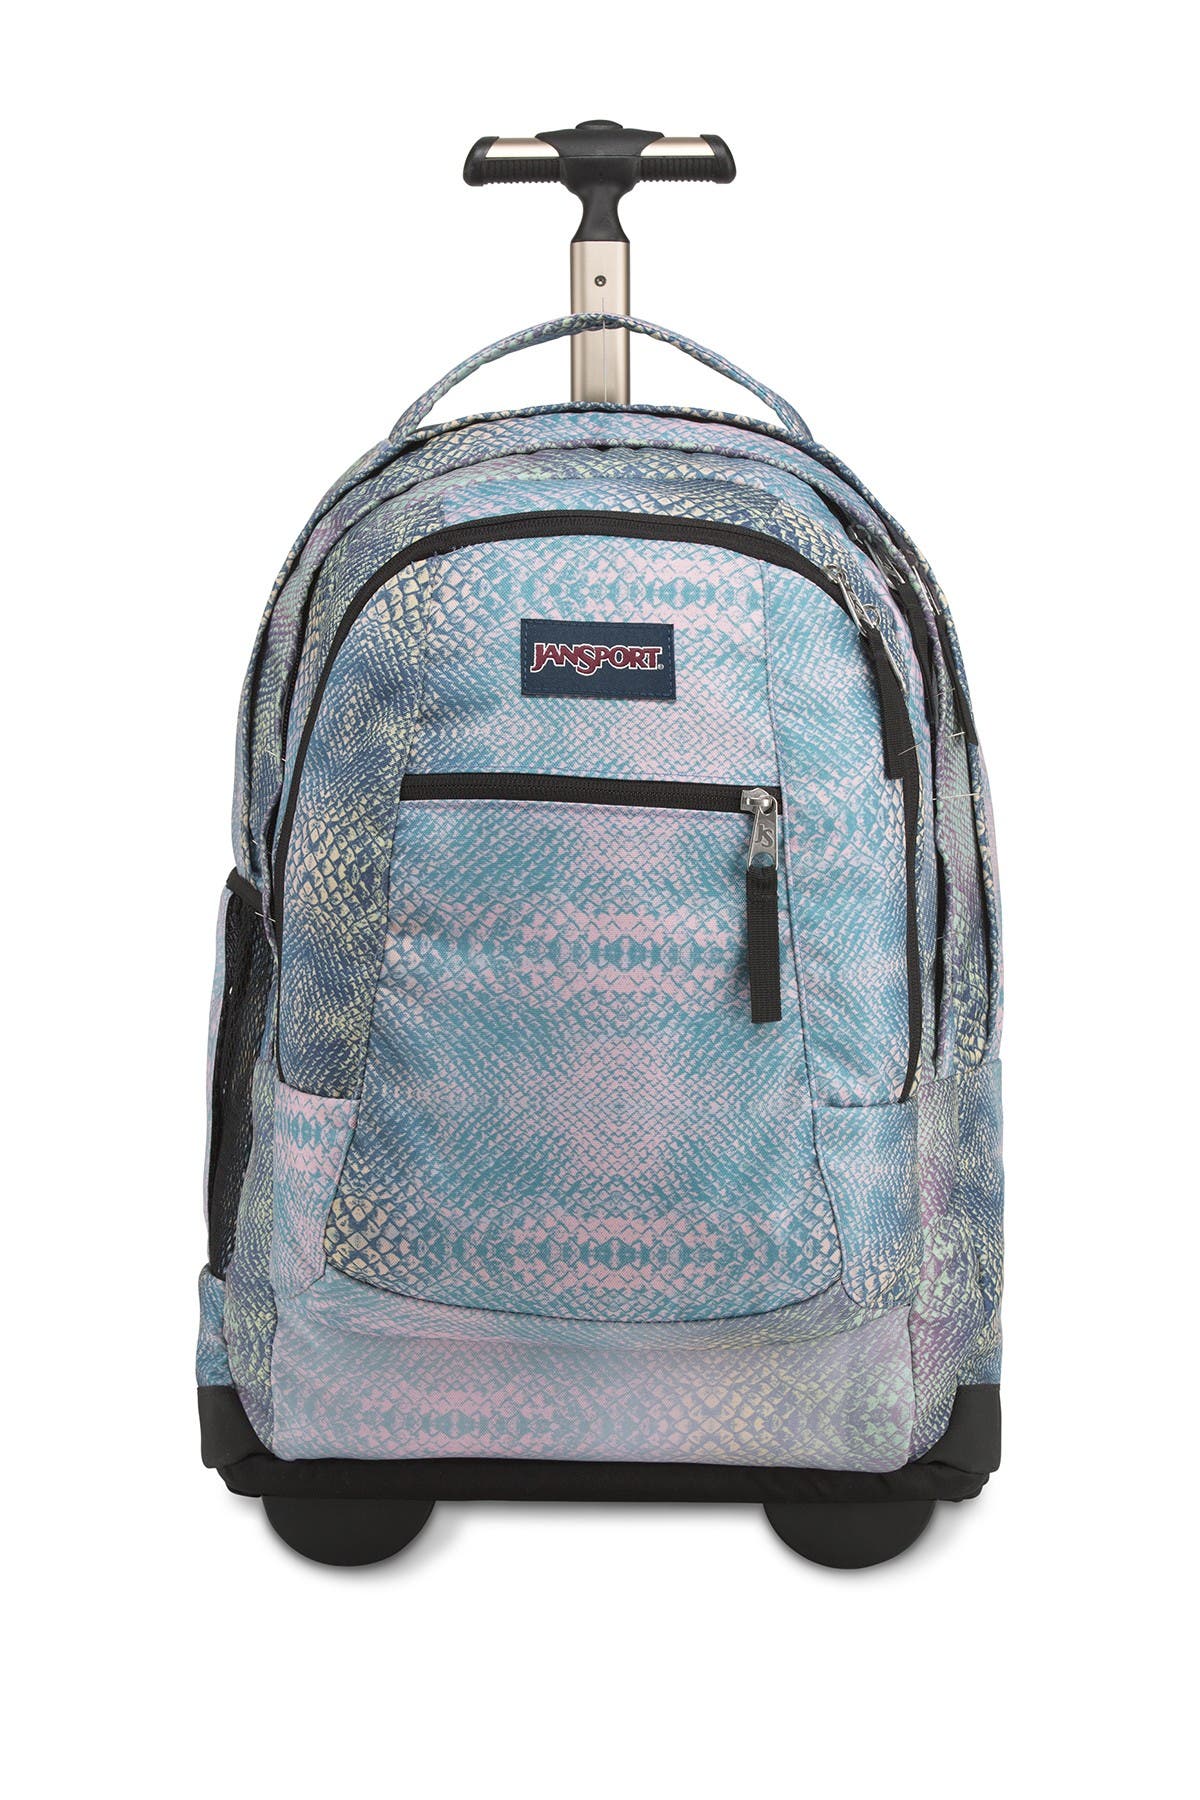 driver 8 backpack